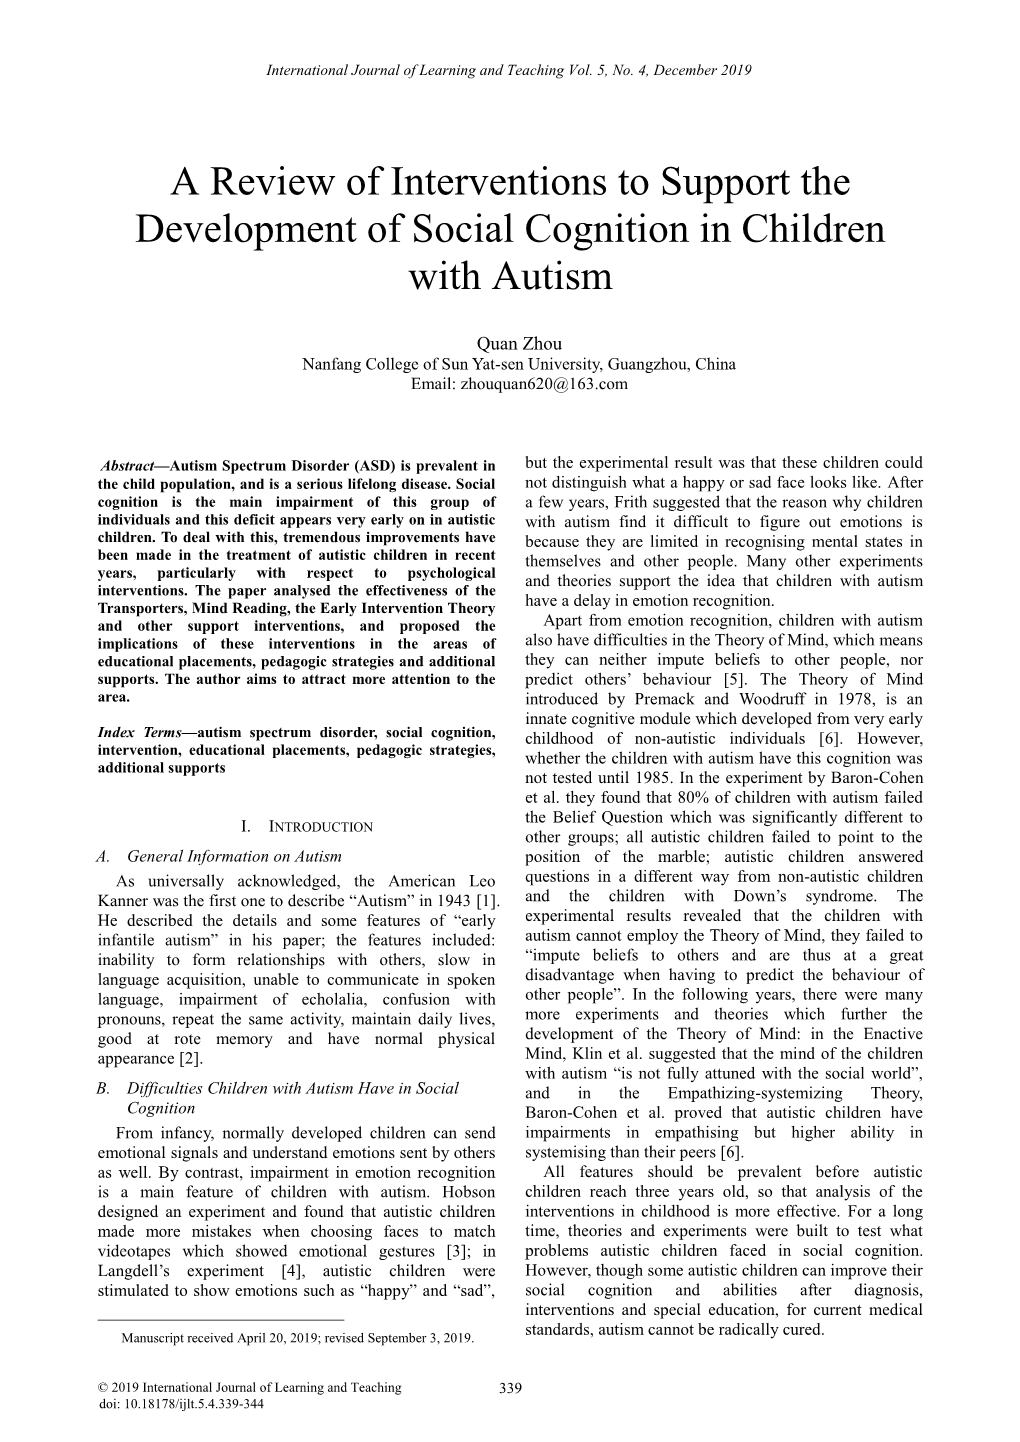 A Review of Interventions to Support the Development of Social Cognition in Children with Autism